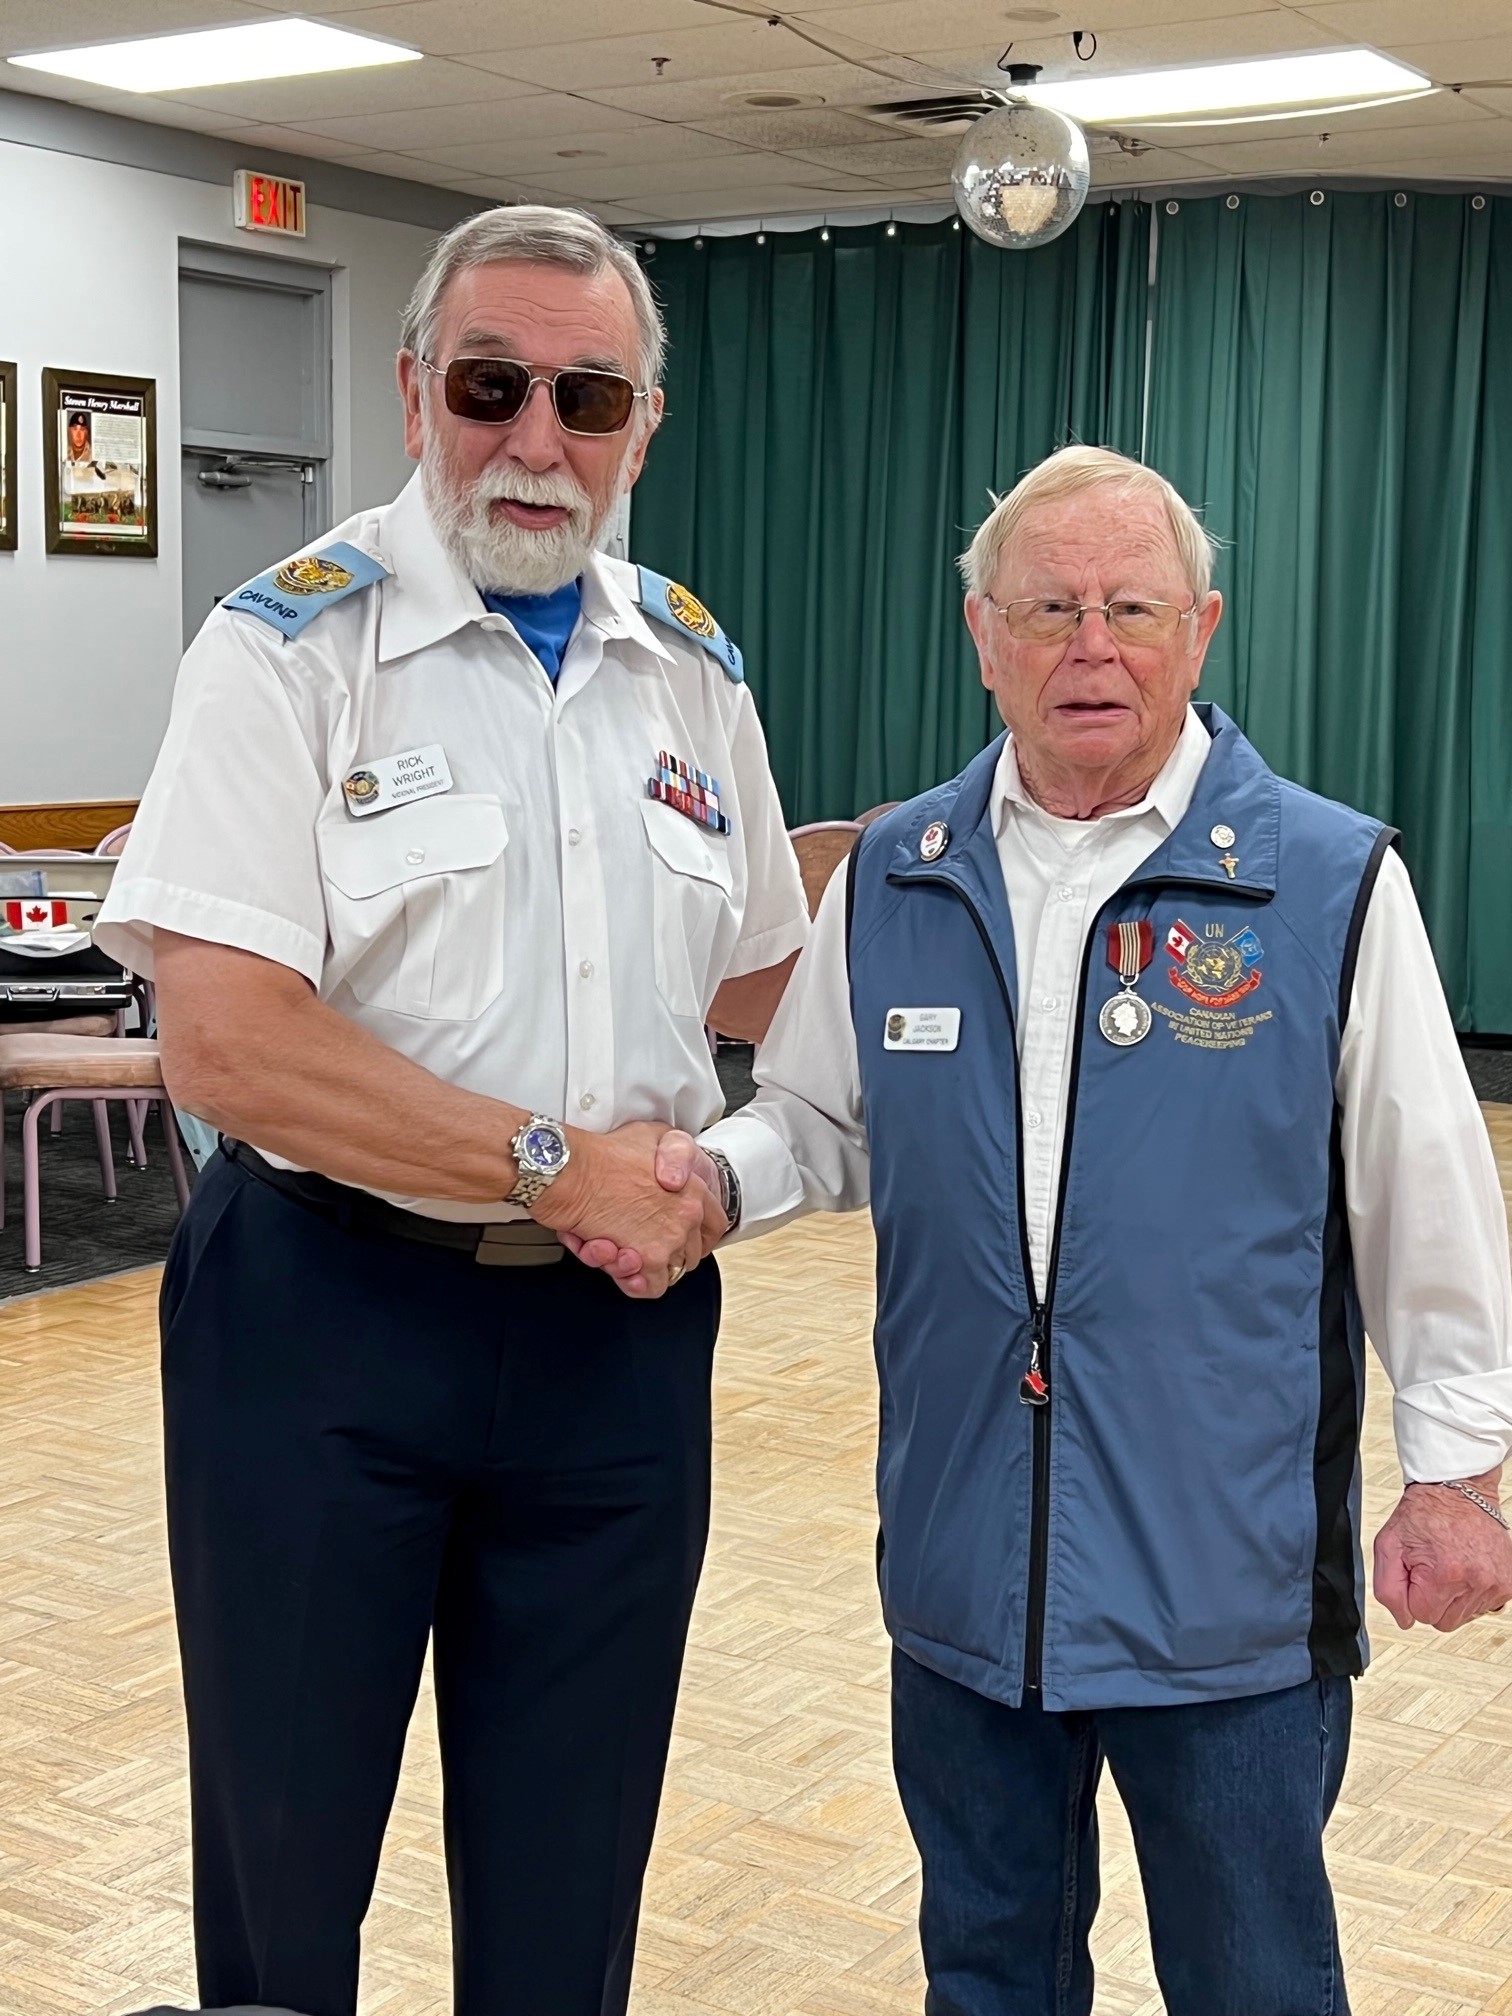 Gary Jackson was presented with the Sovereign’s medal for Volunteers 